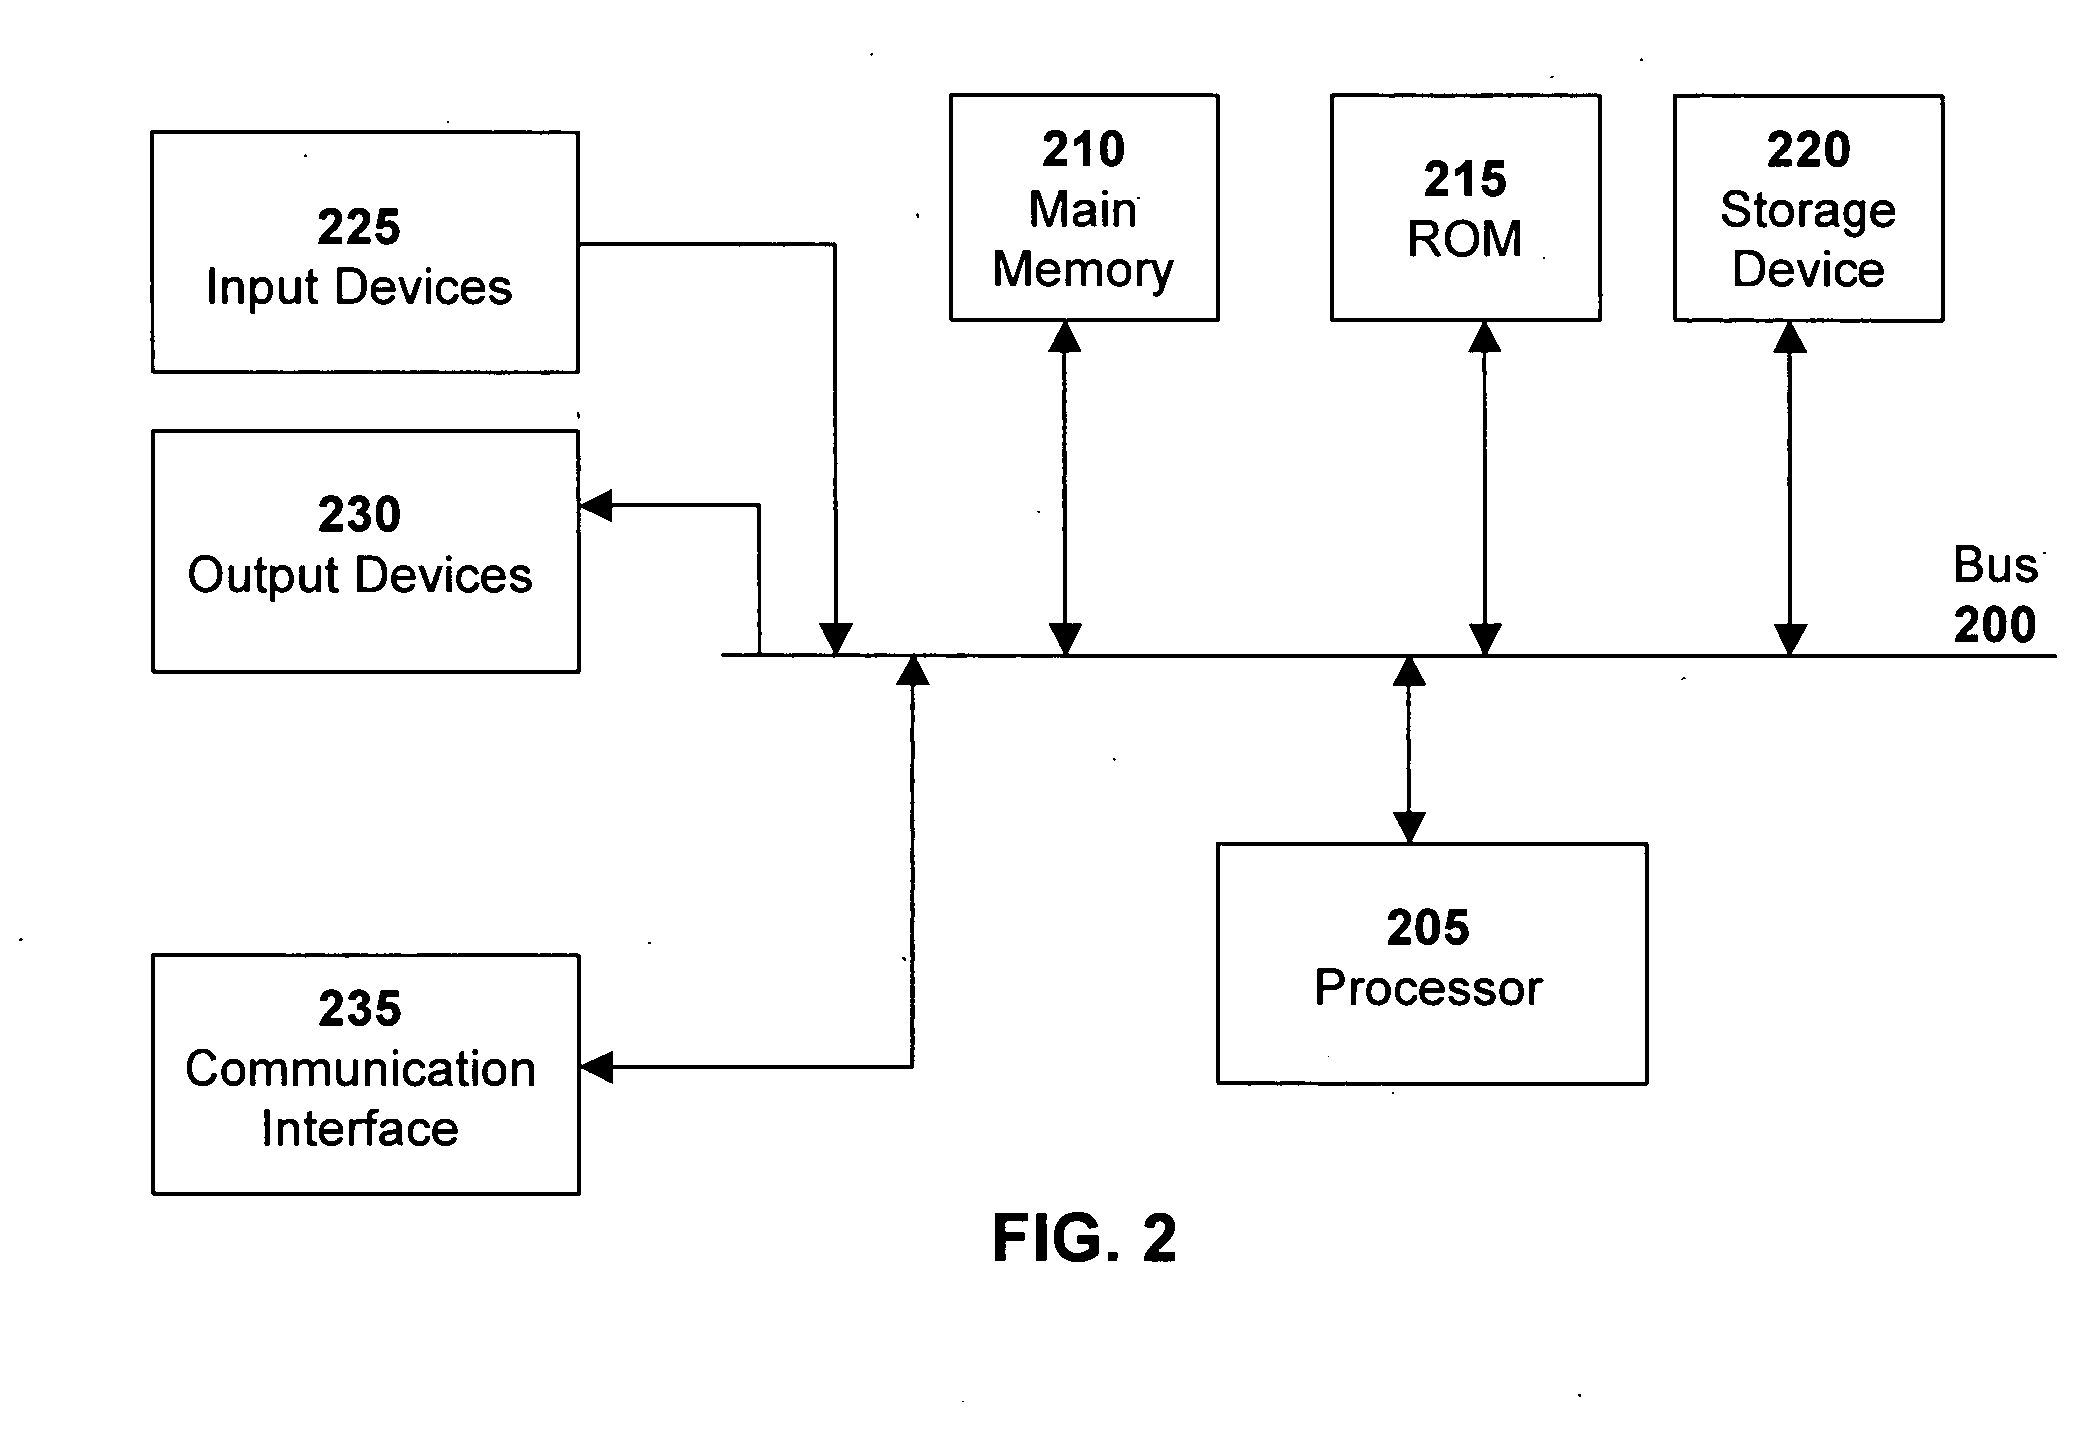 Generating and serving tiles in a digital mapping system